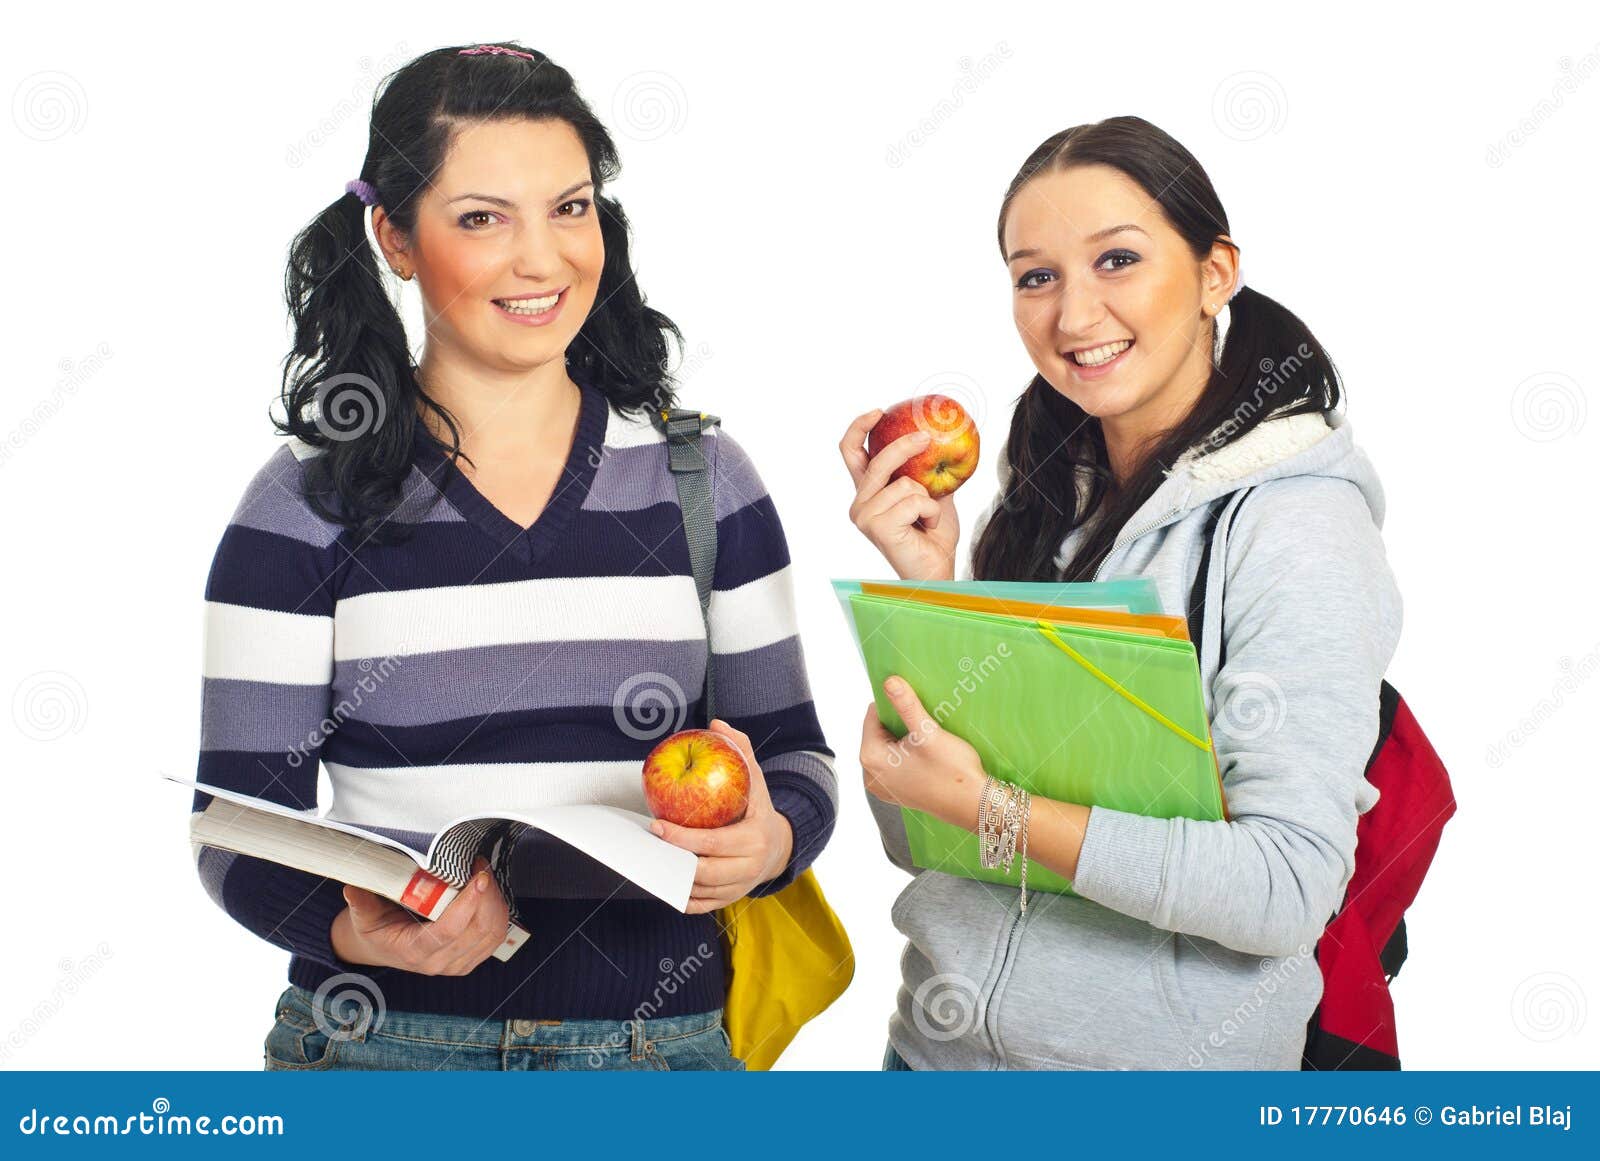 pretty students females holding apples